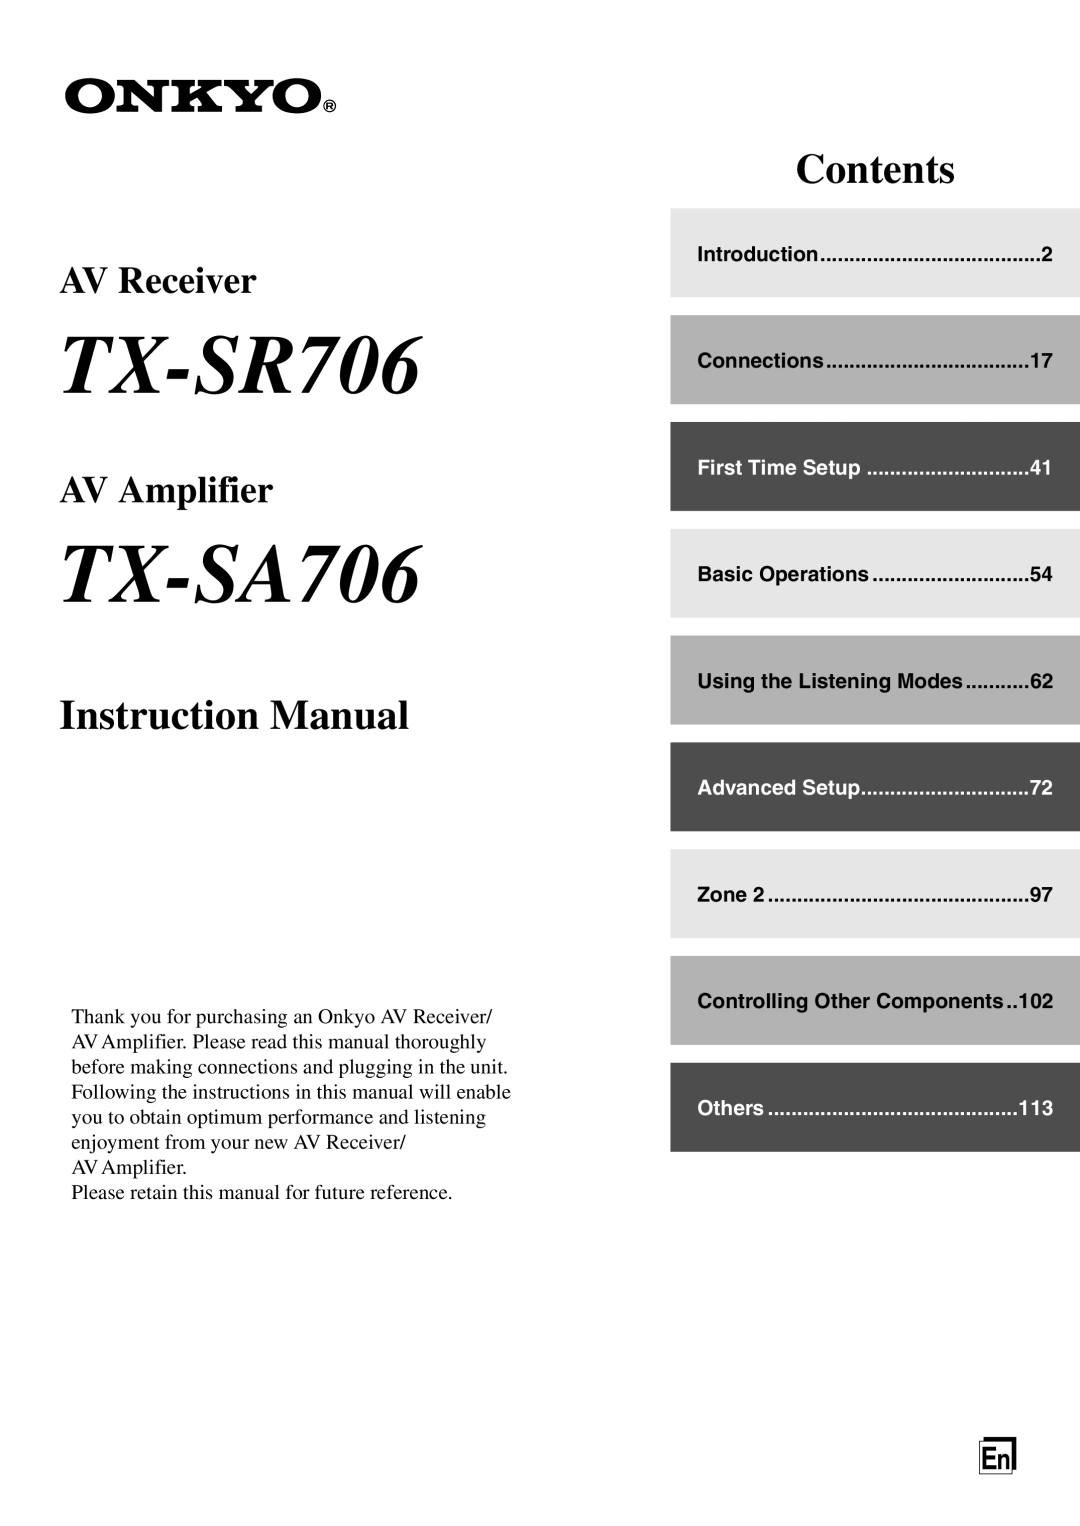 Onkyo TX-SA706 instruction manual Using the Listening Modes, Controlling Other Components, TX-SR706, Instruction Manual 